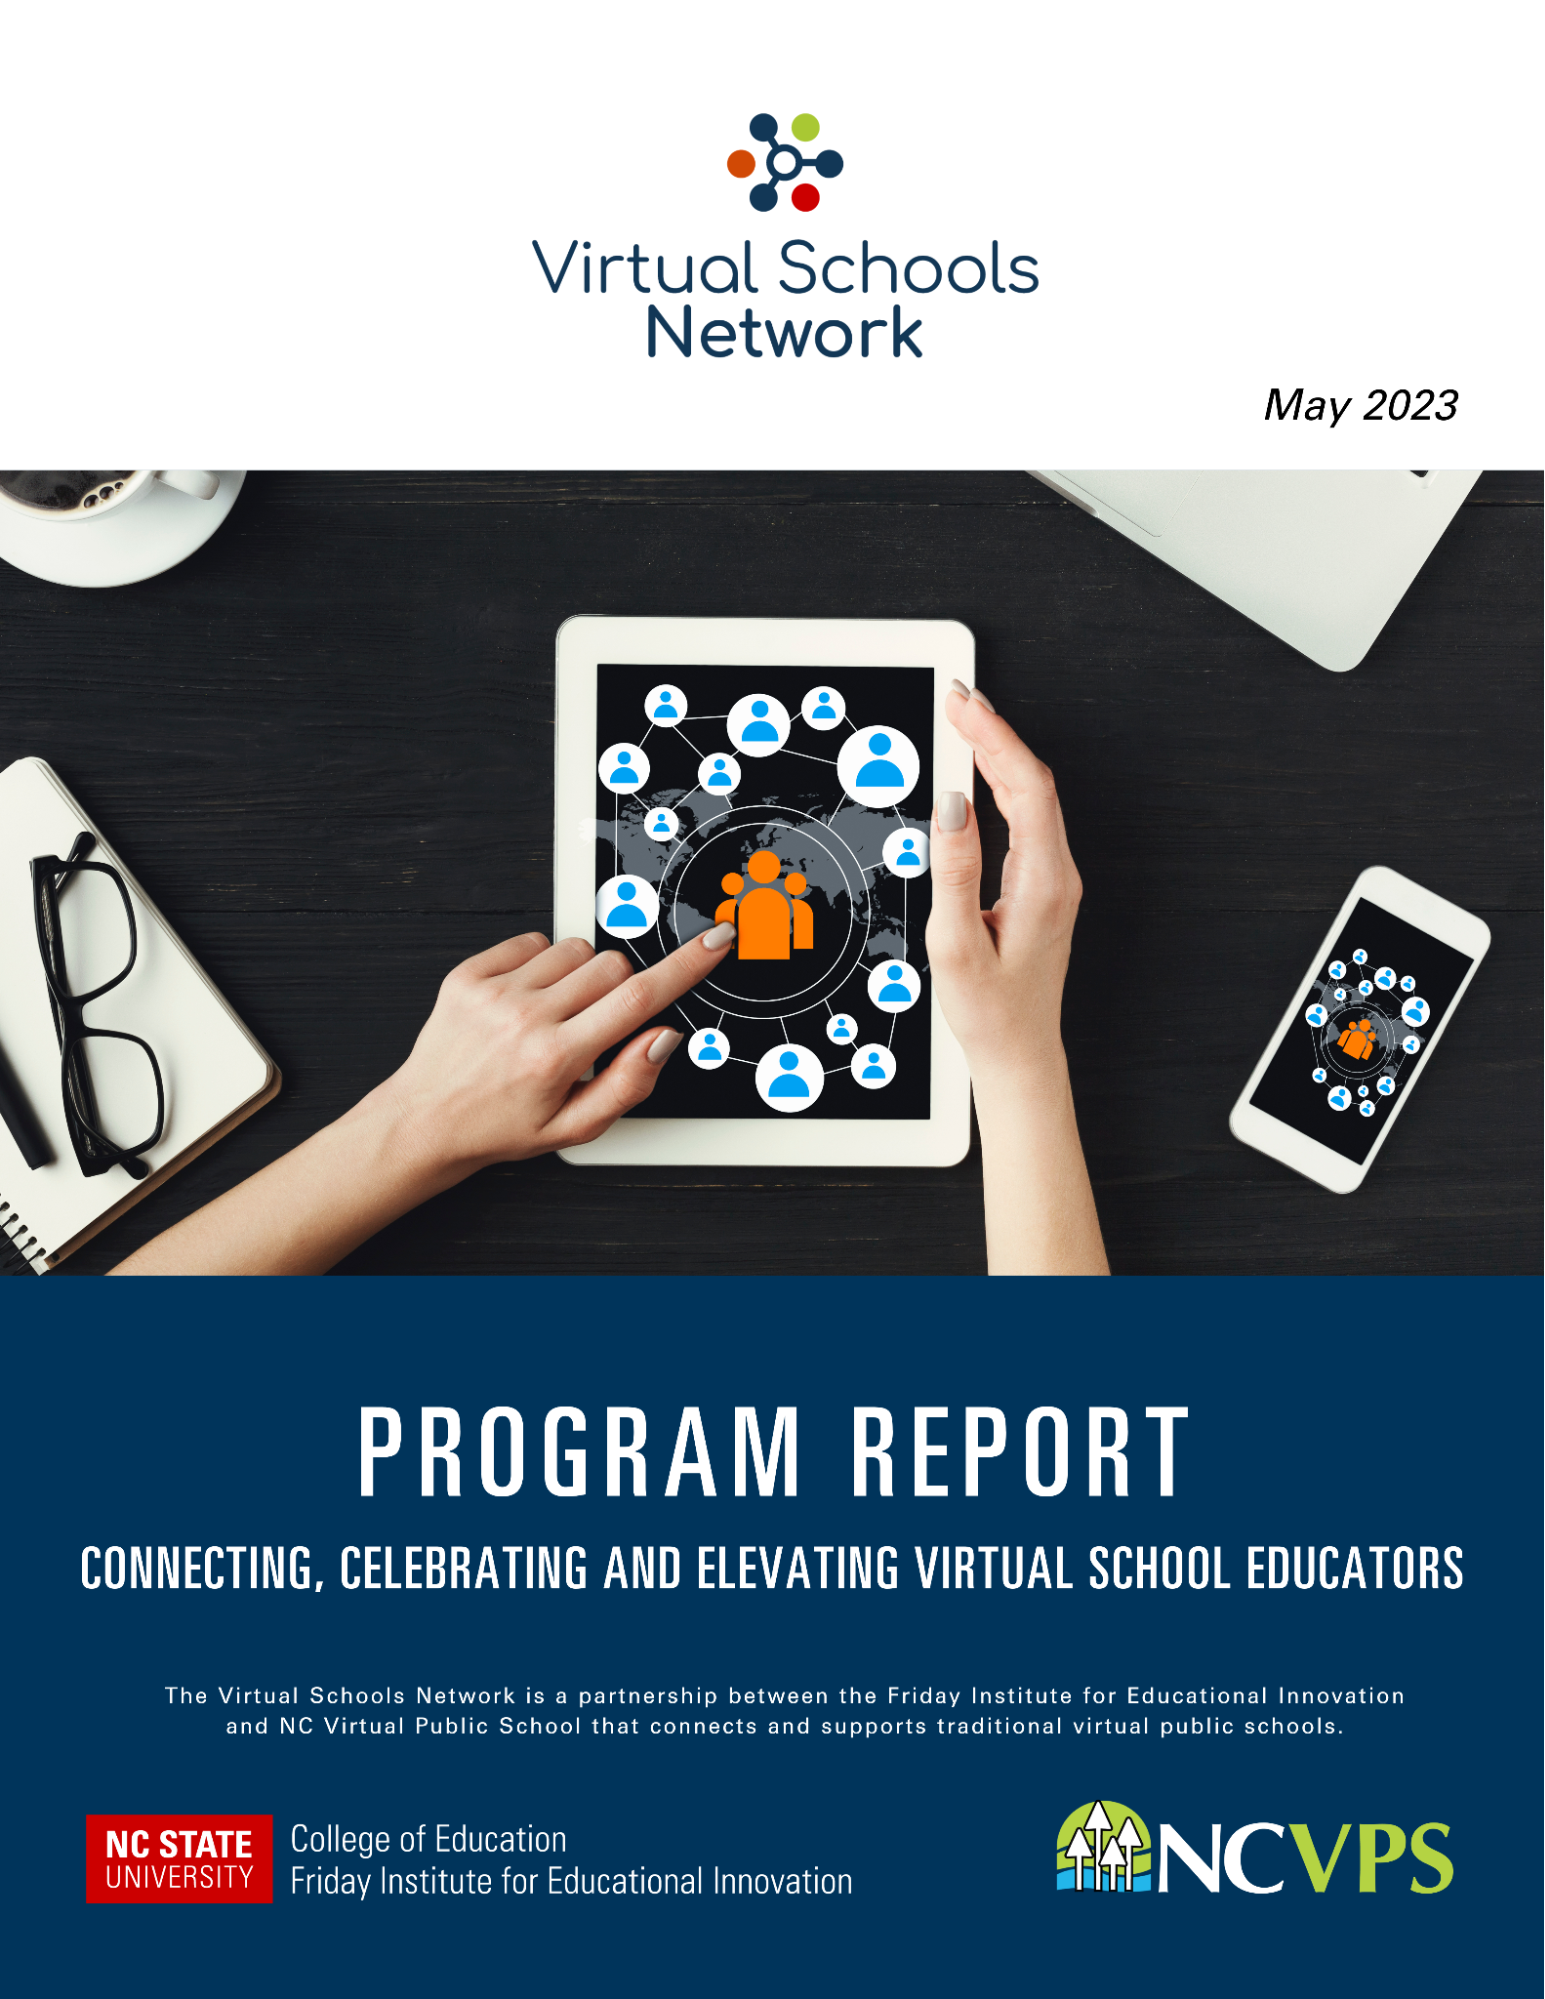 Cover of the program report for the Virtual Schools Network. Features a person's hand using a tablet.